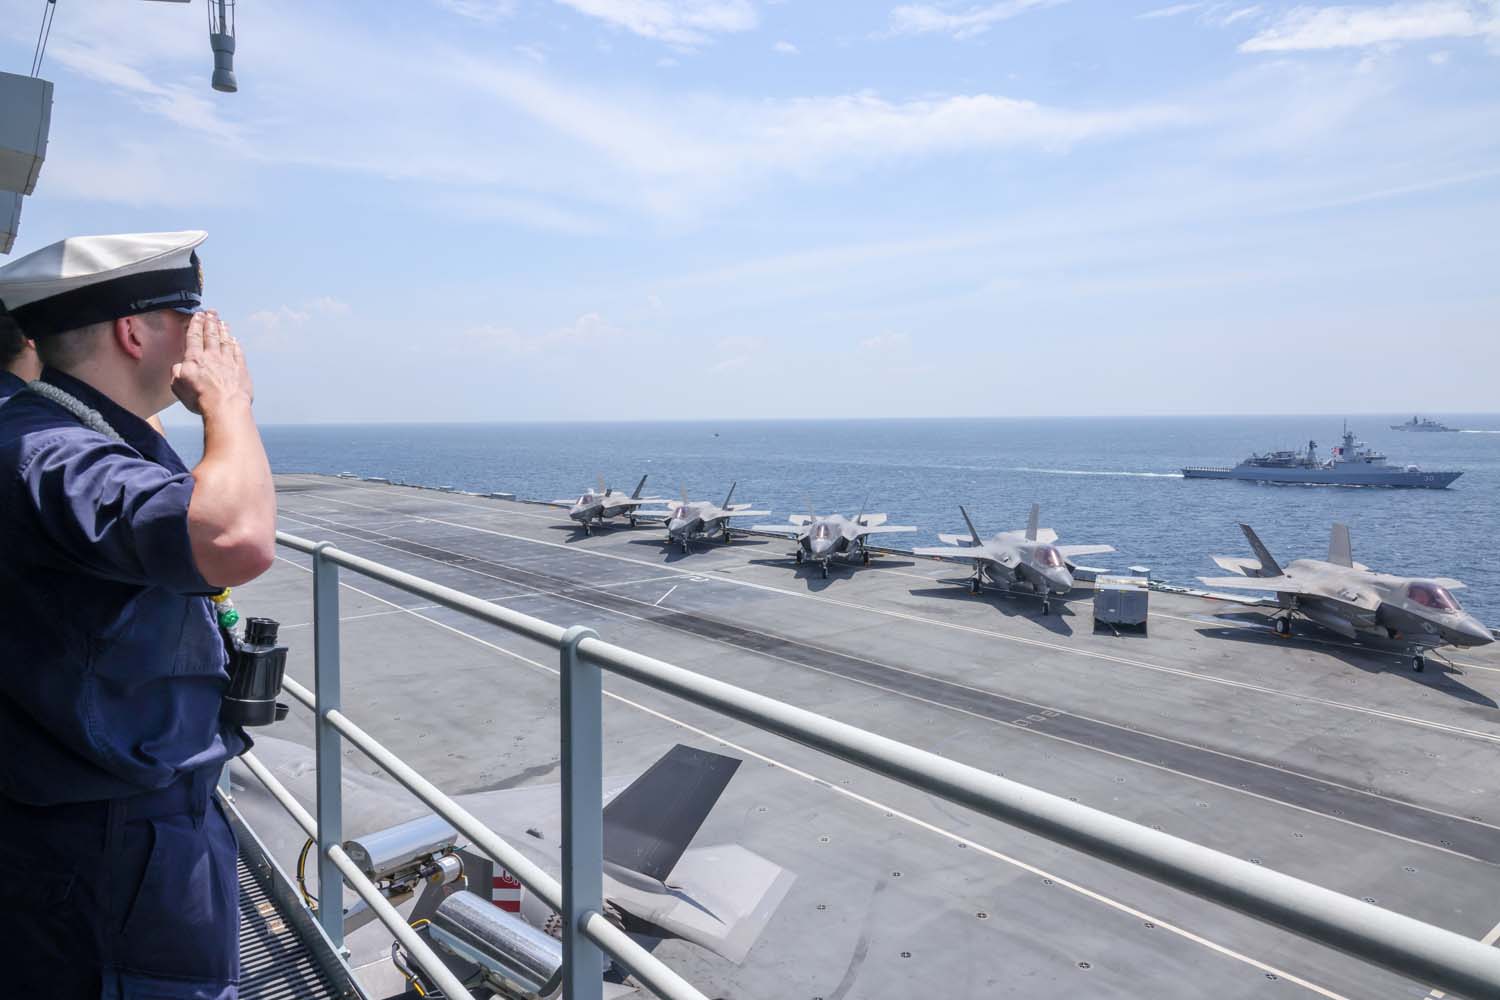 Royal Navy Carrier Strike Group Sails with Three Navies Near Strait of Malacca